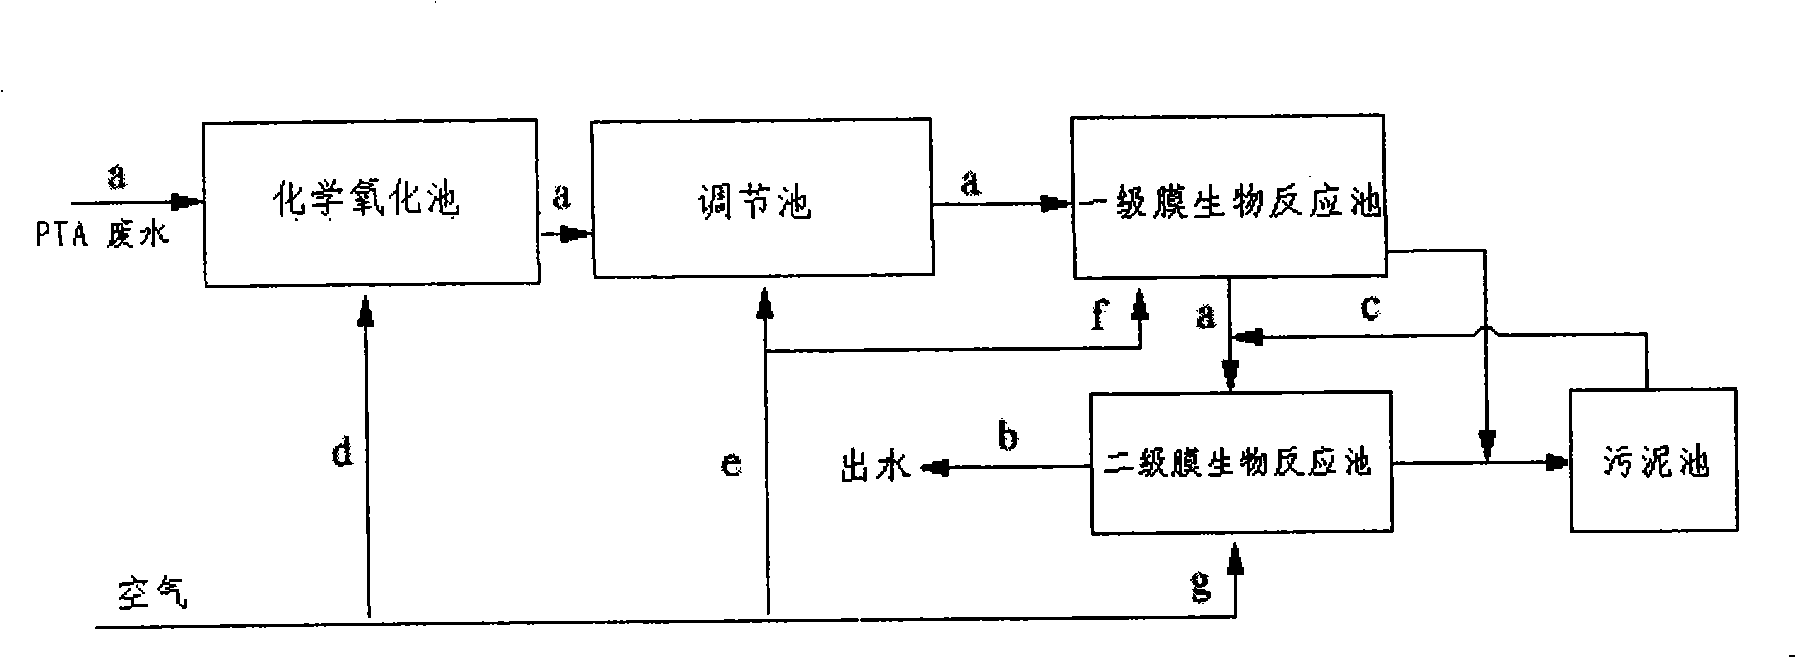 Processing method for waste water in production process of fine terephthalic acid